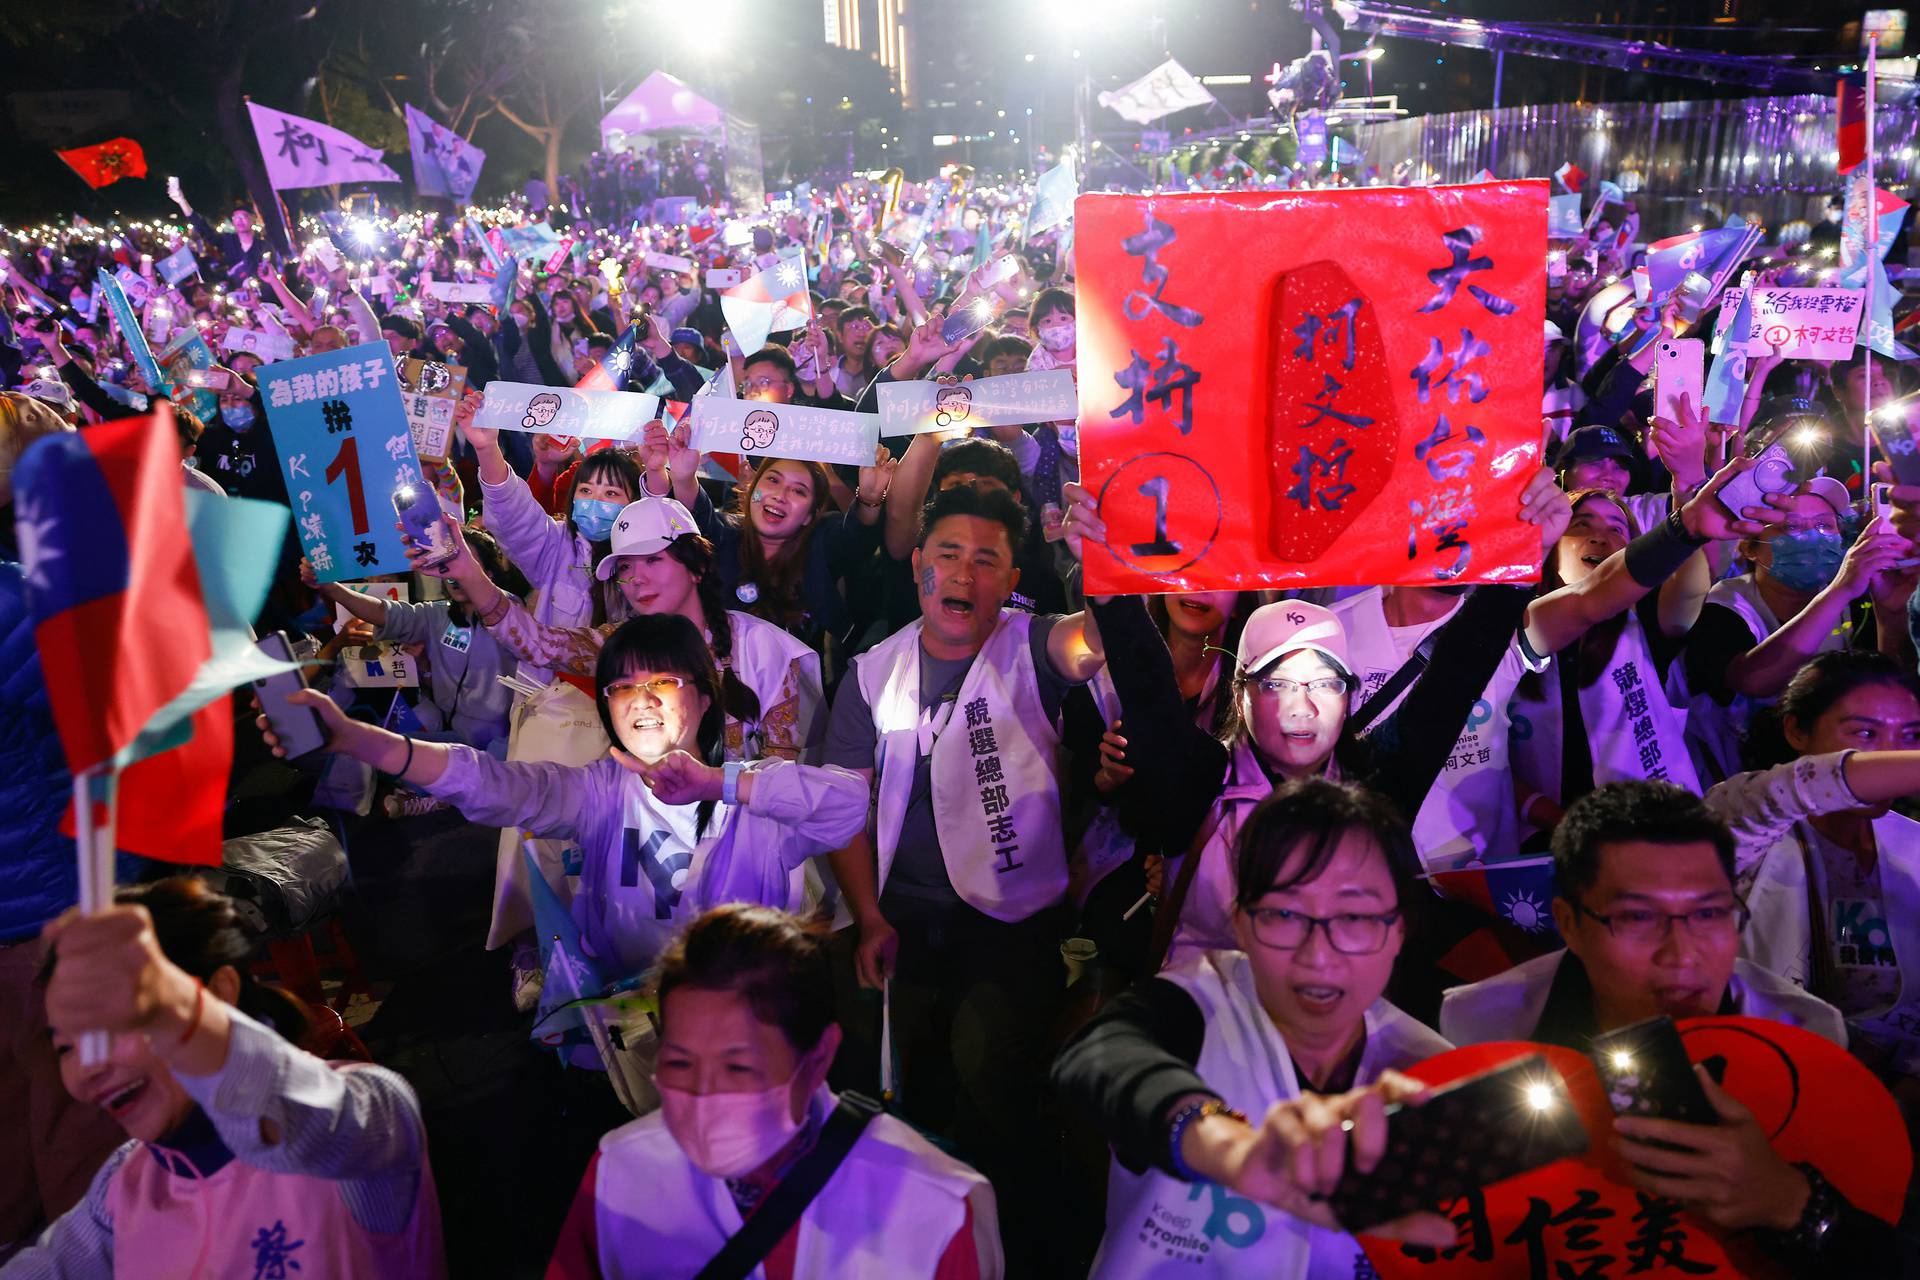 Supporters of Ko Wen-je, Taiwan People's Party (TPP) presidential candidate, attend a campaign event ahead of the election in Kaohsiung